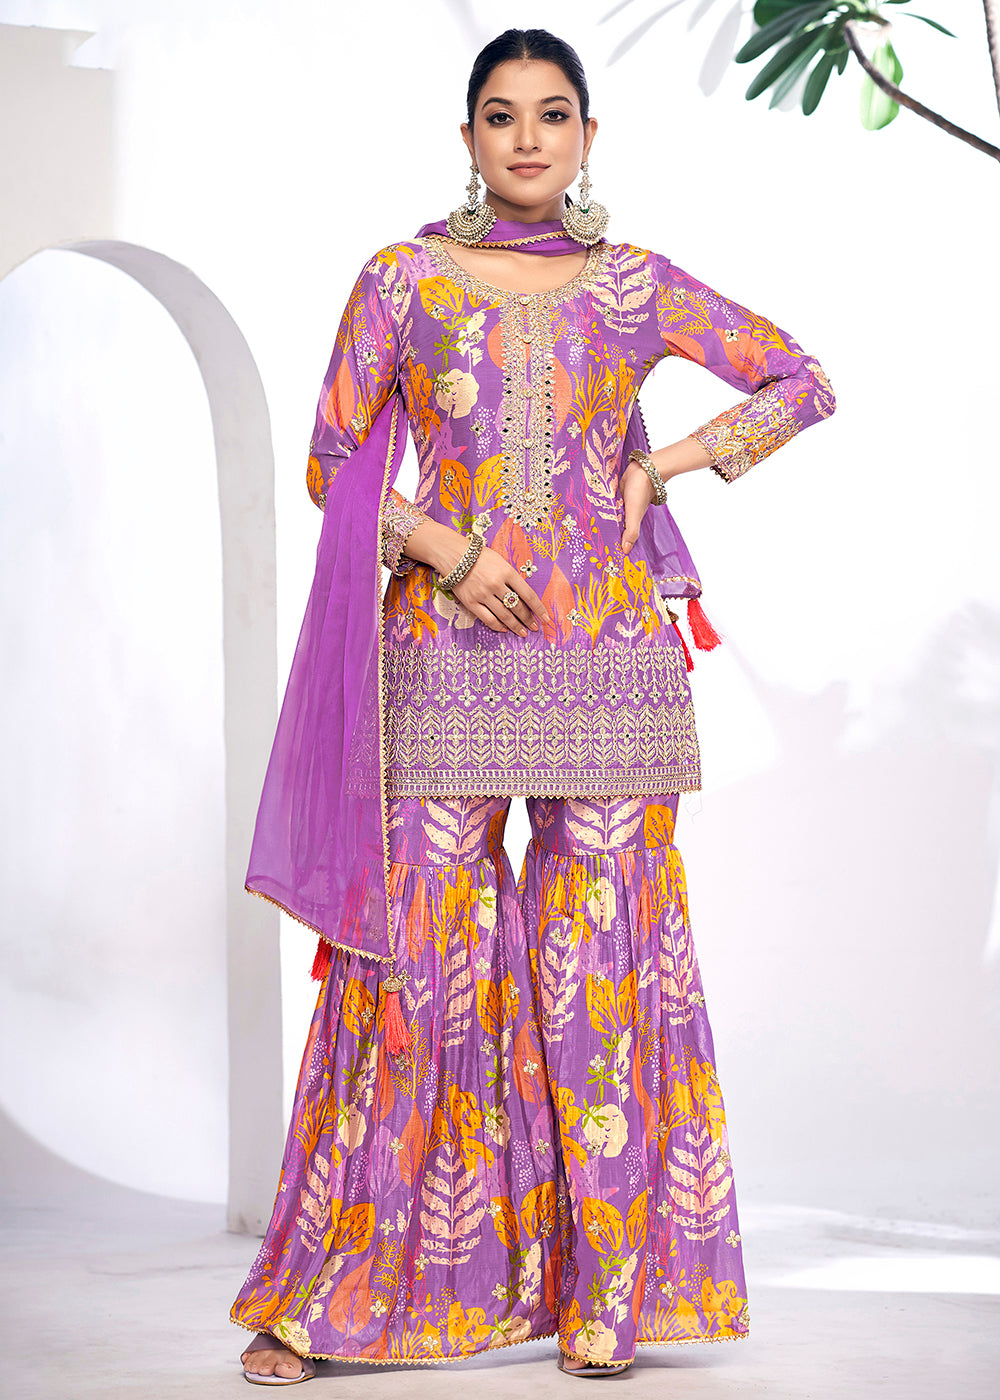 Shop Now Purple Embroidered & Printed Festive Gharara Suit Online at Empress Clothing in USA, UK, Canada, Italy & Worldwide. 